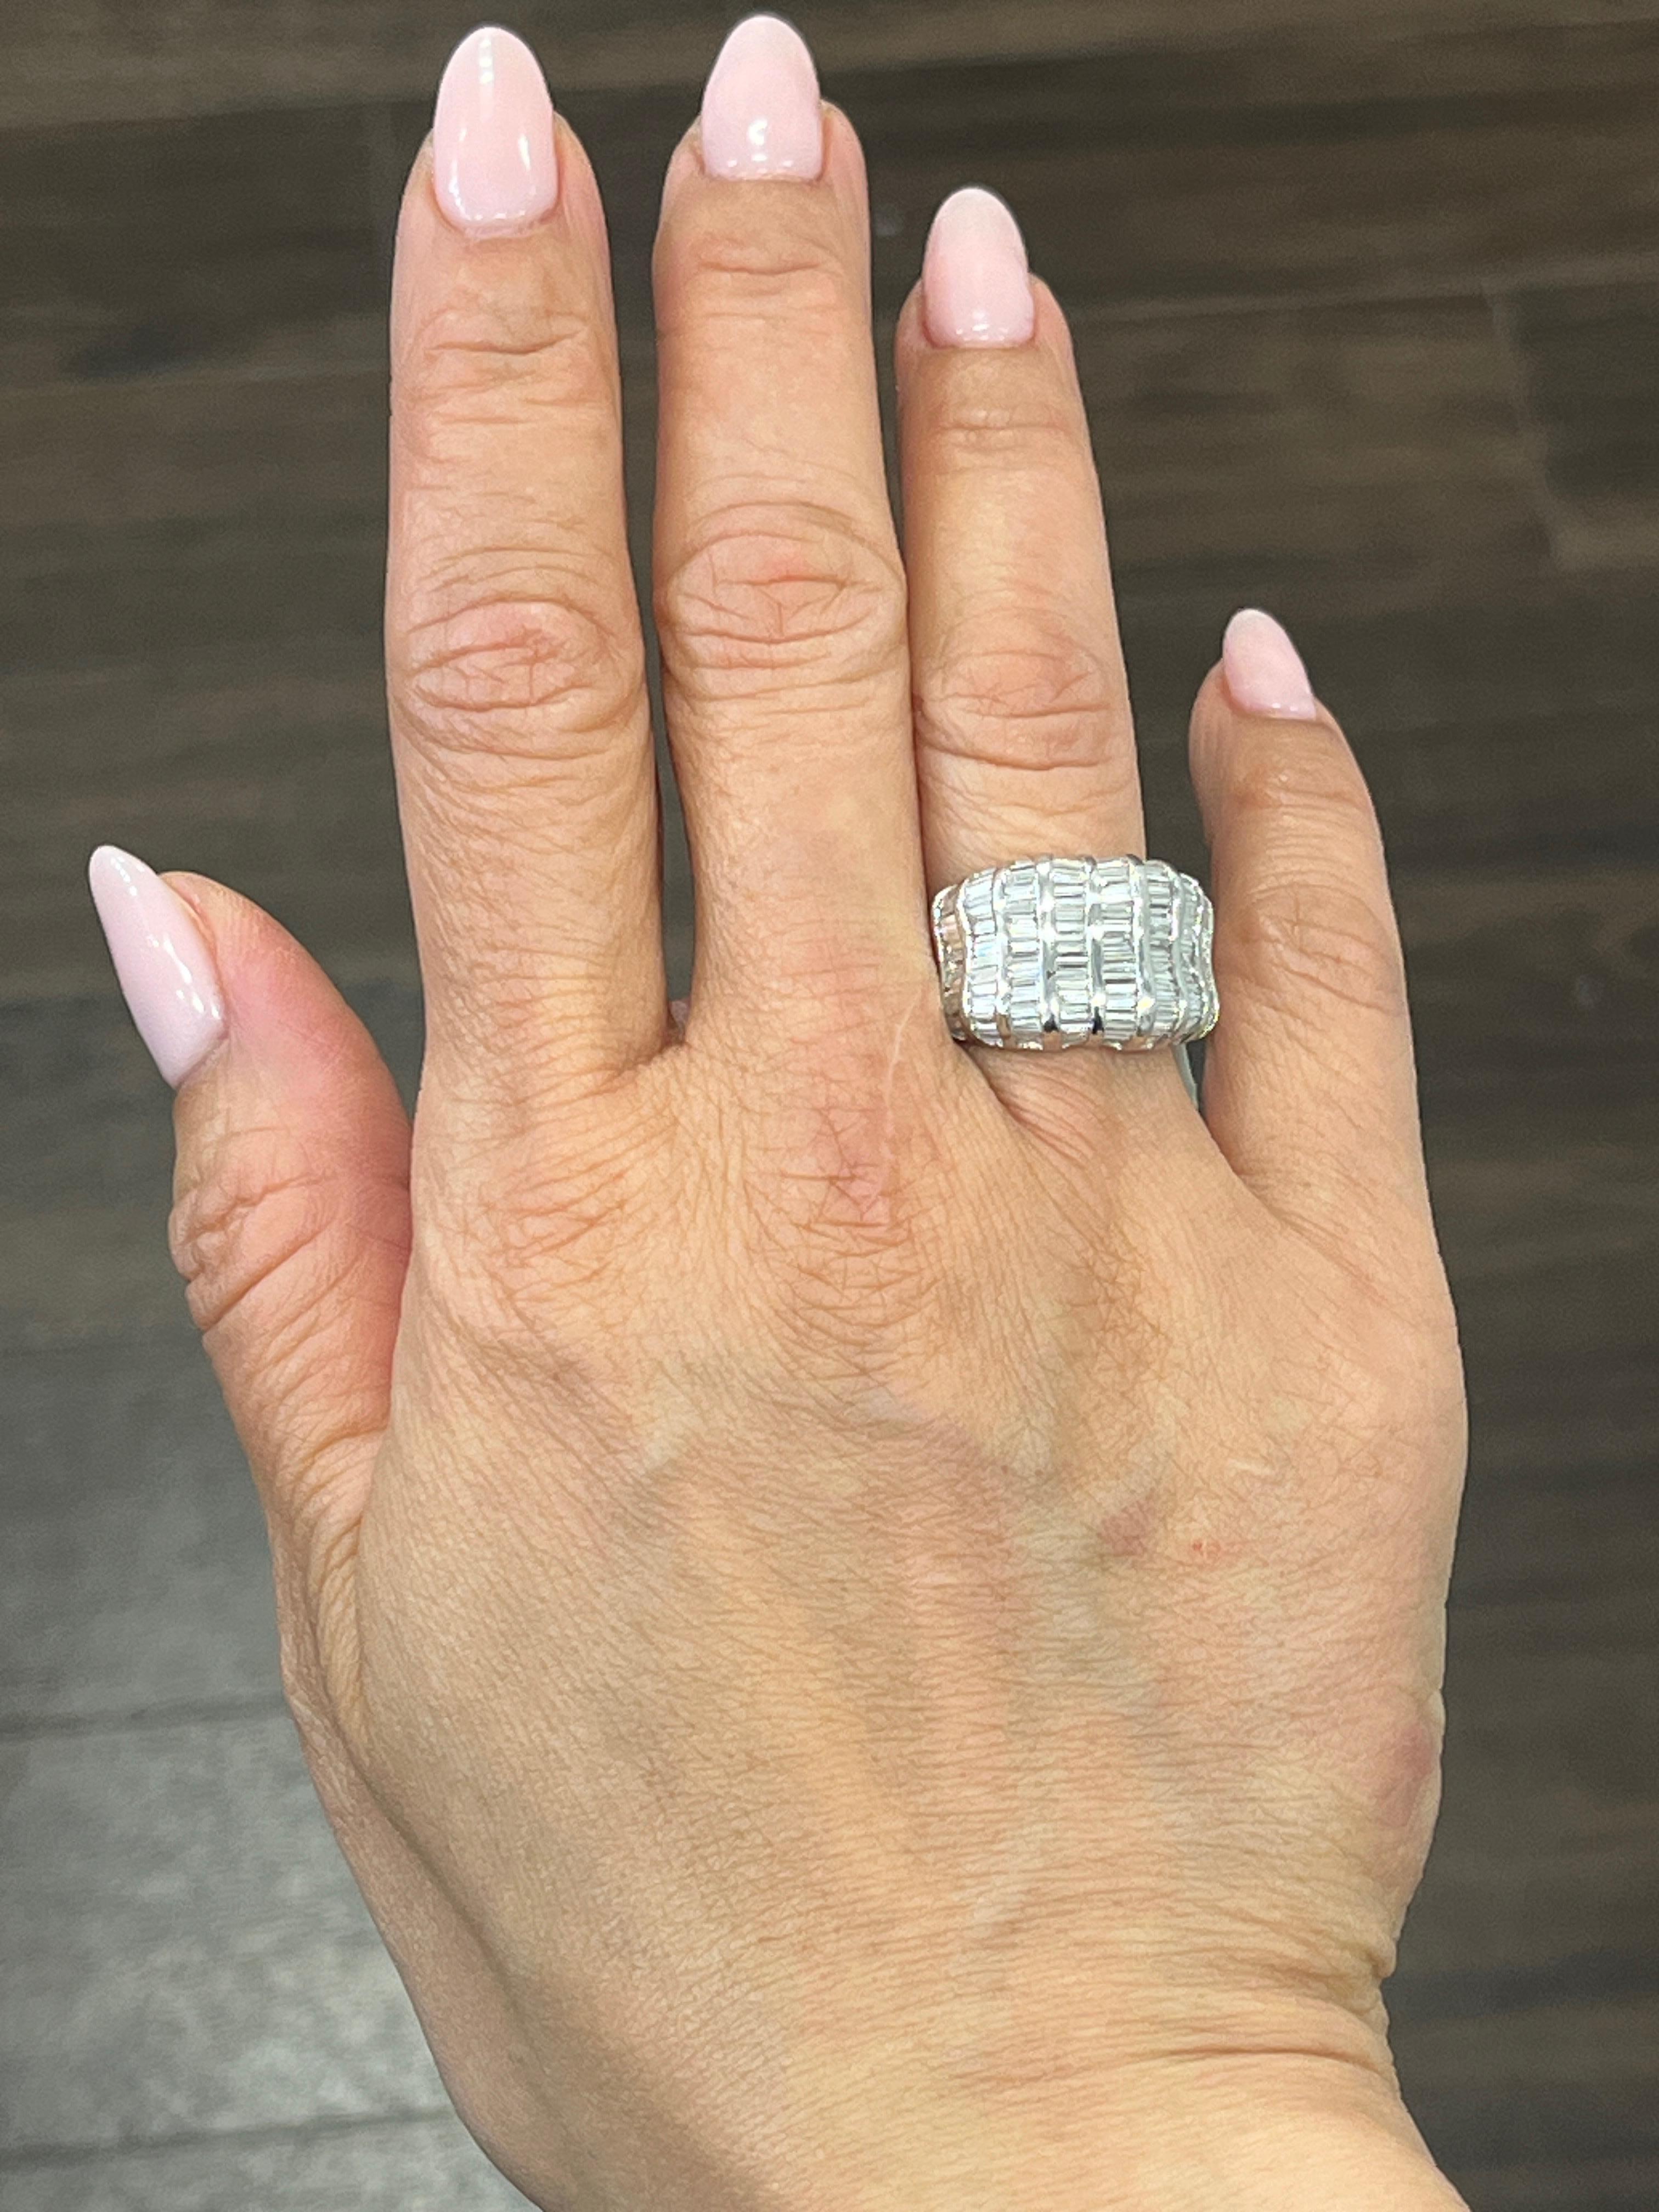 This exquisite ring is a stunning piece of fine jewelry that features a 3.48 carat baguette cut diamonds set in 18k white gold. The diamonds have a clarity grade of VS1/VS2 and a color grade of G/H, and is accented beautifully by the white gold